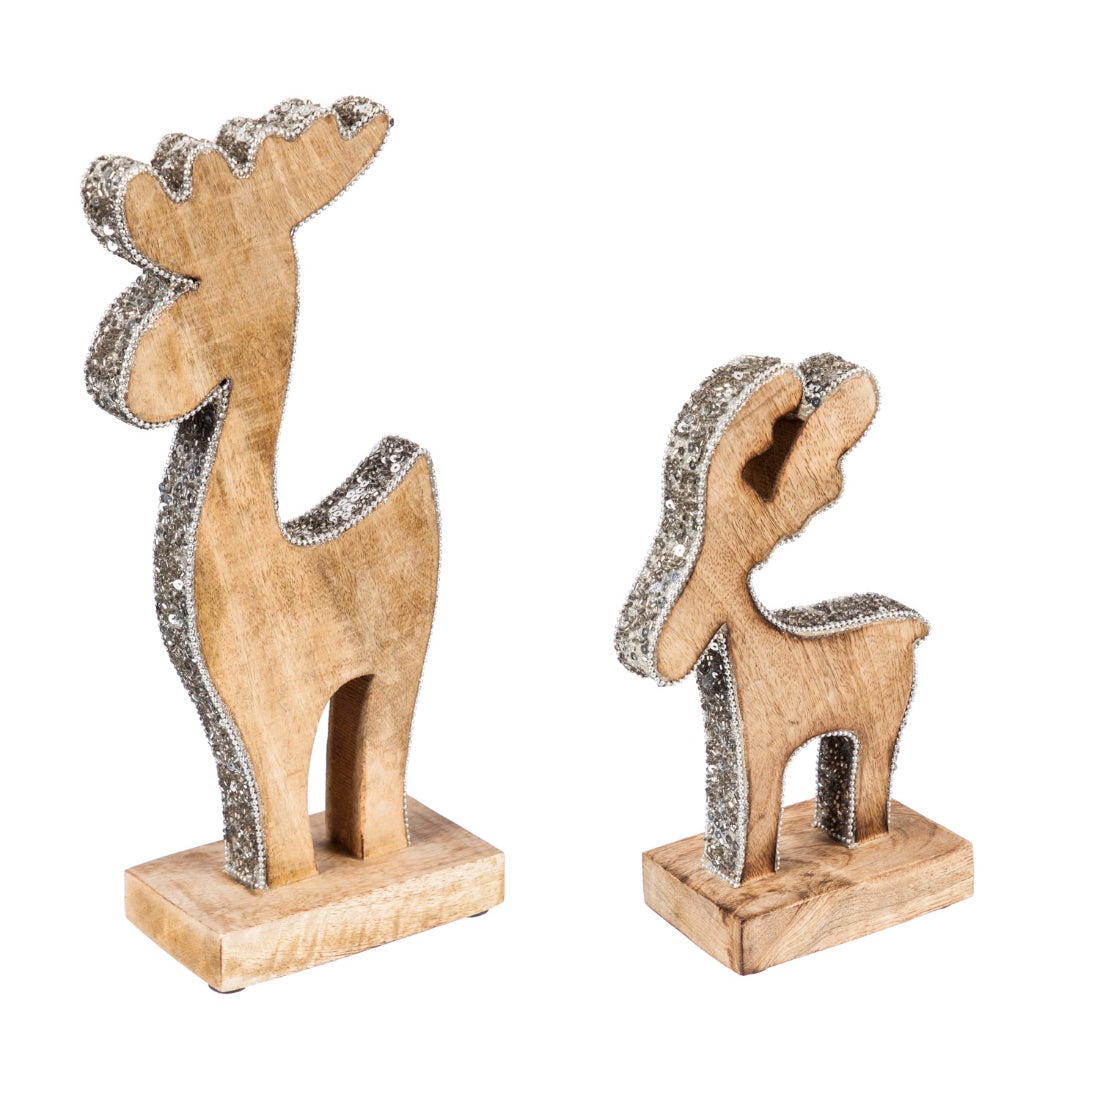 Mango Wood Reindeer with Silver Sequins Tabletop Decoration, Set of 2